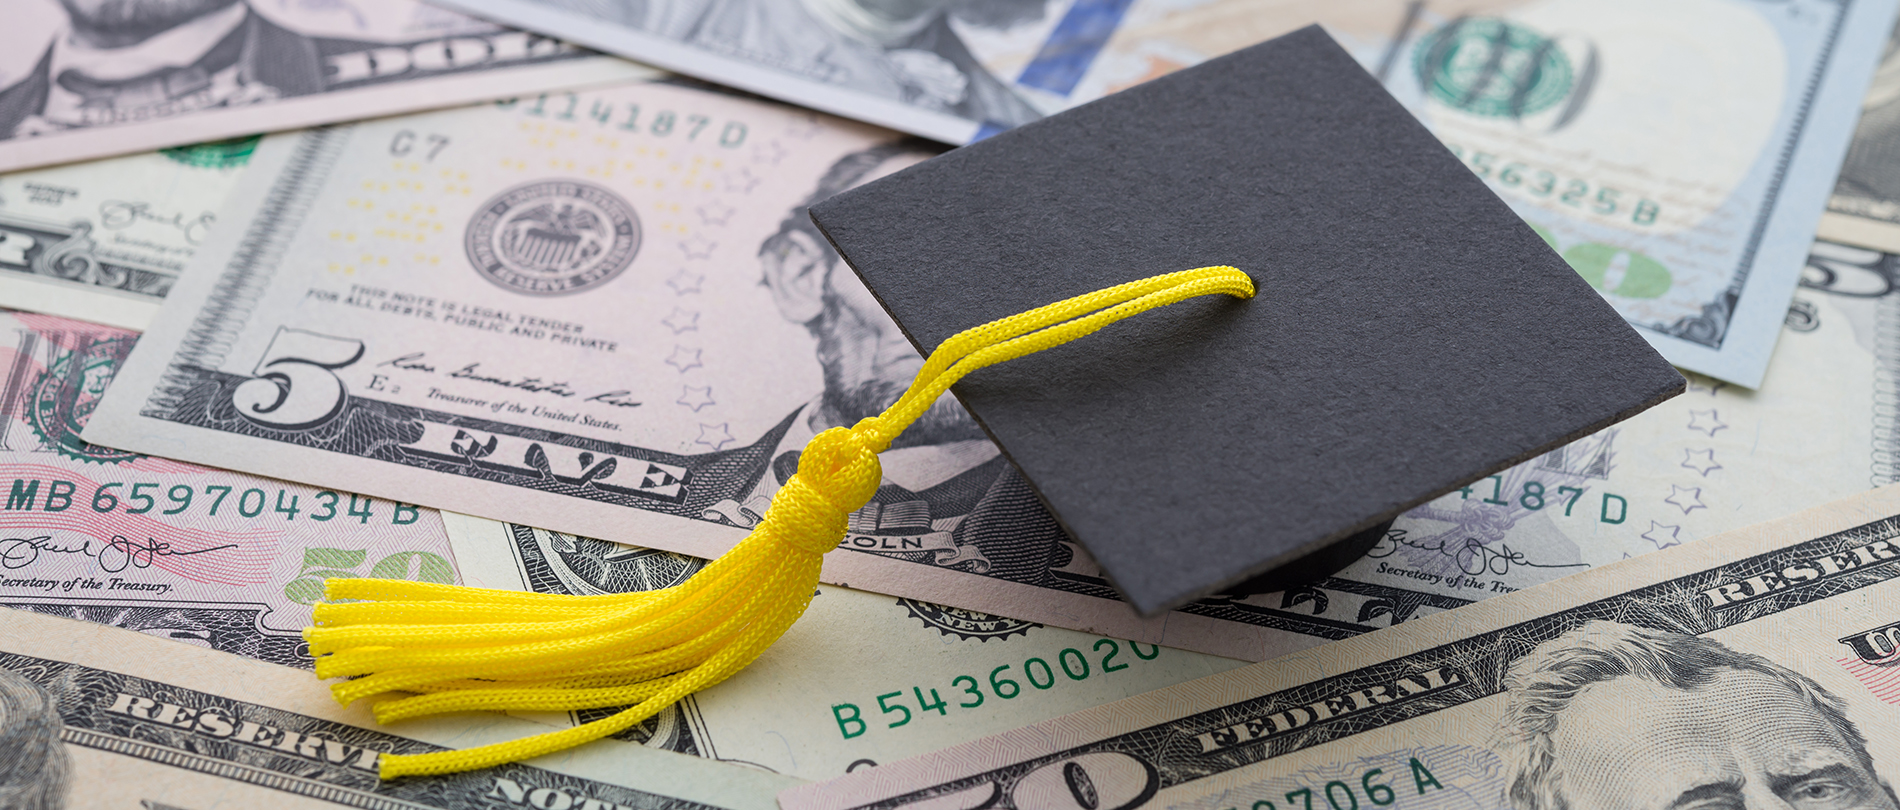 A graduation cap and tassel sitting on top of money